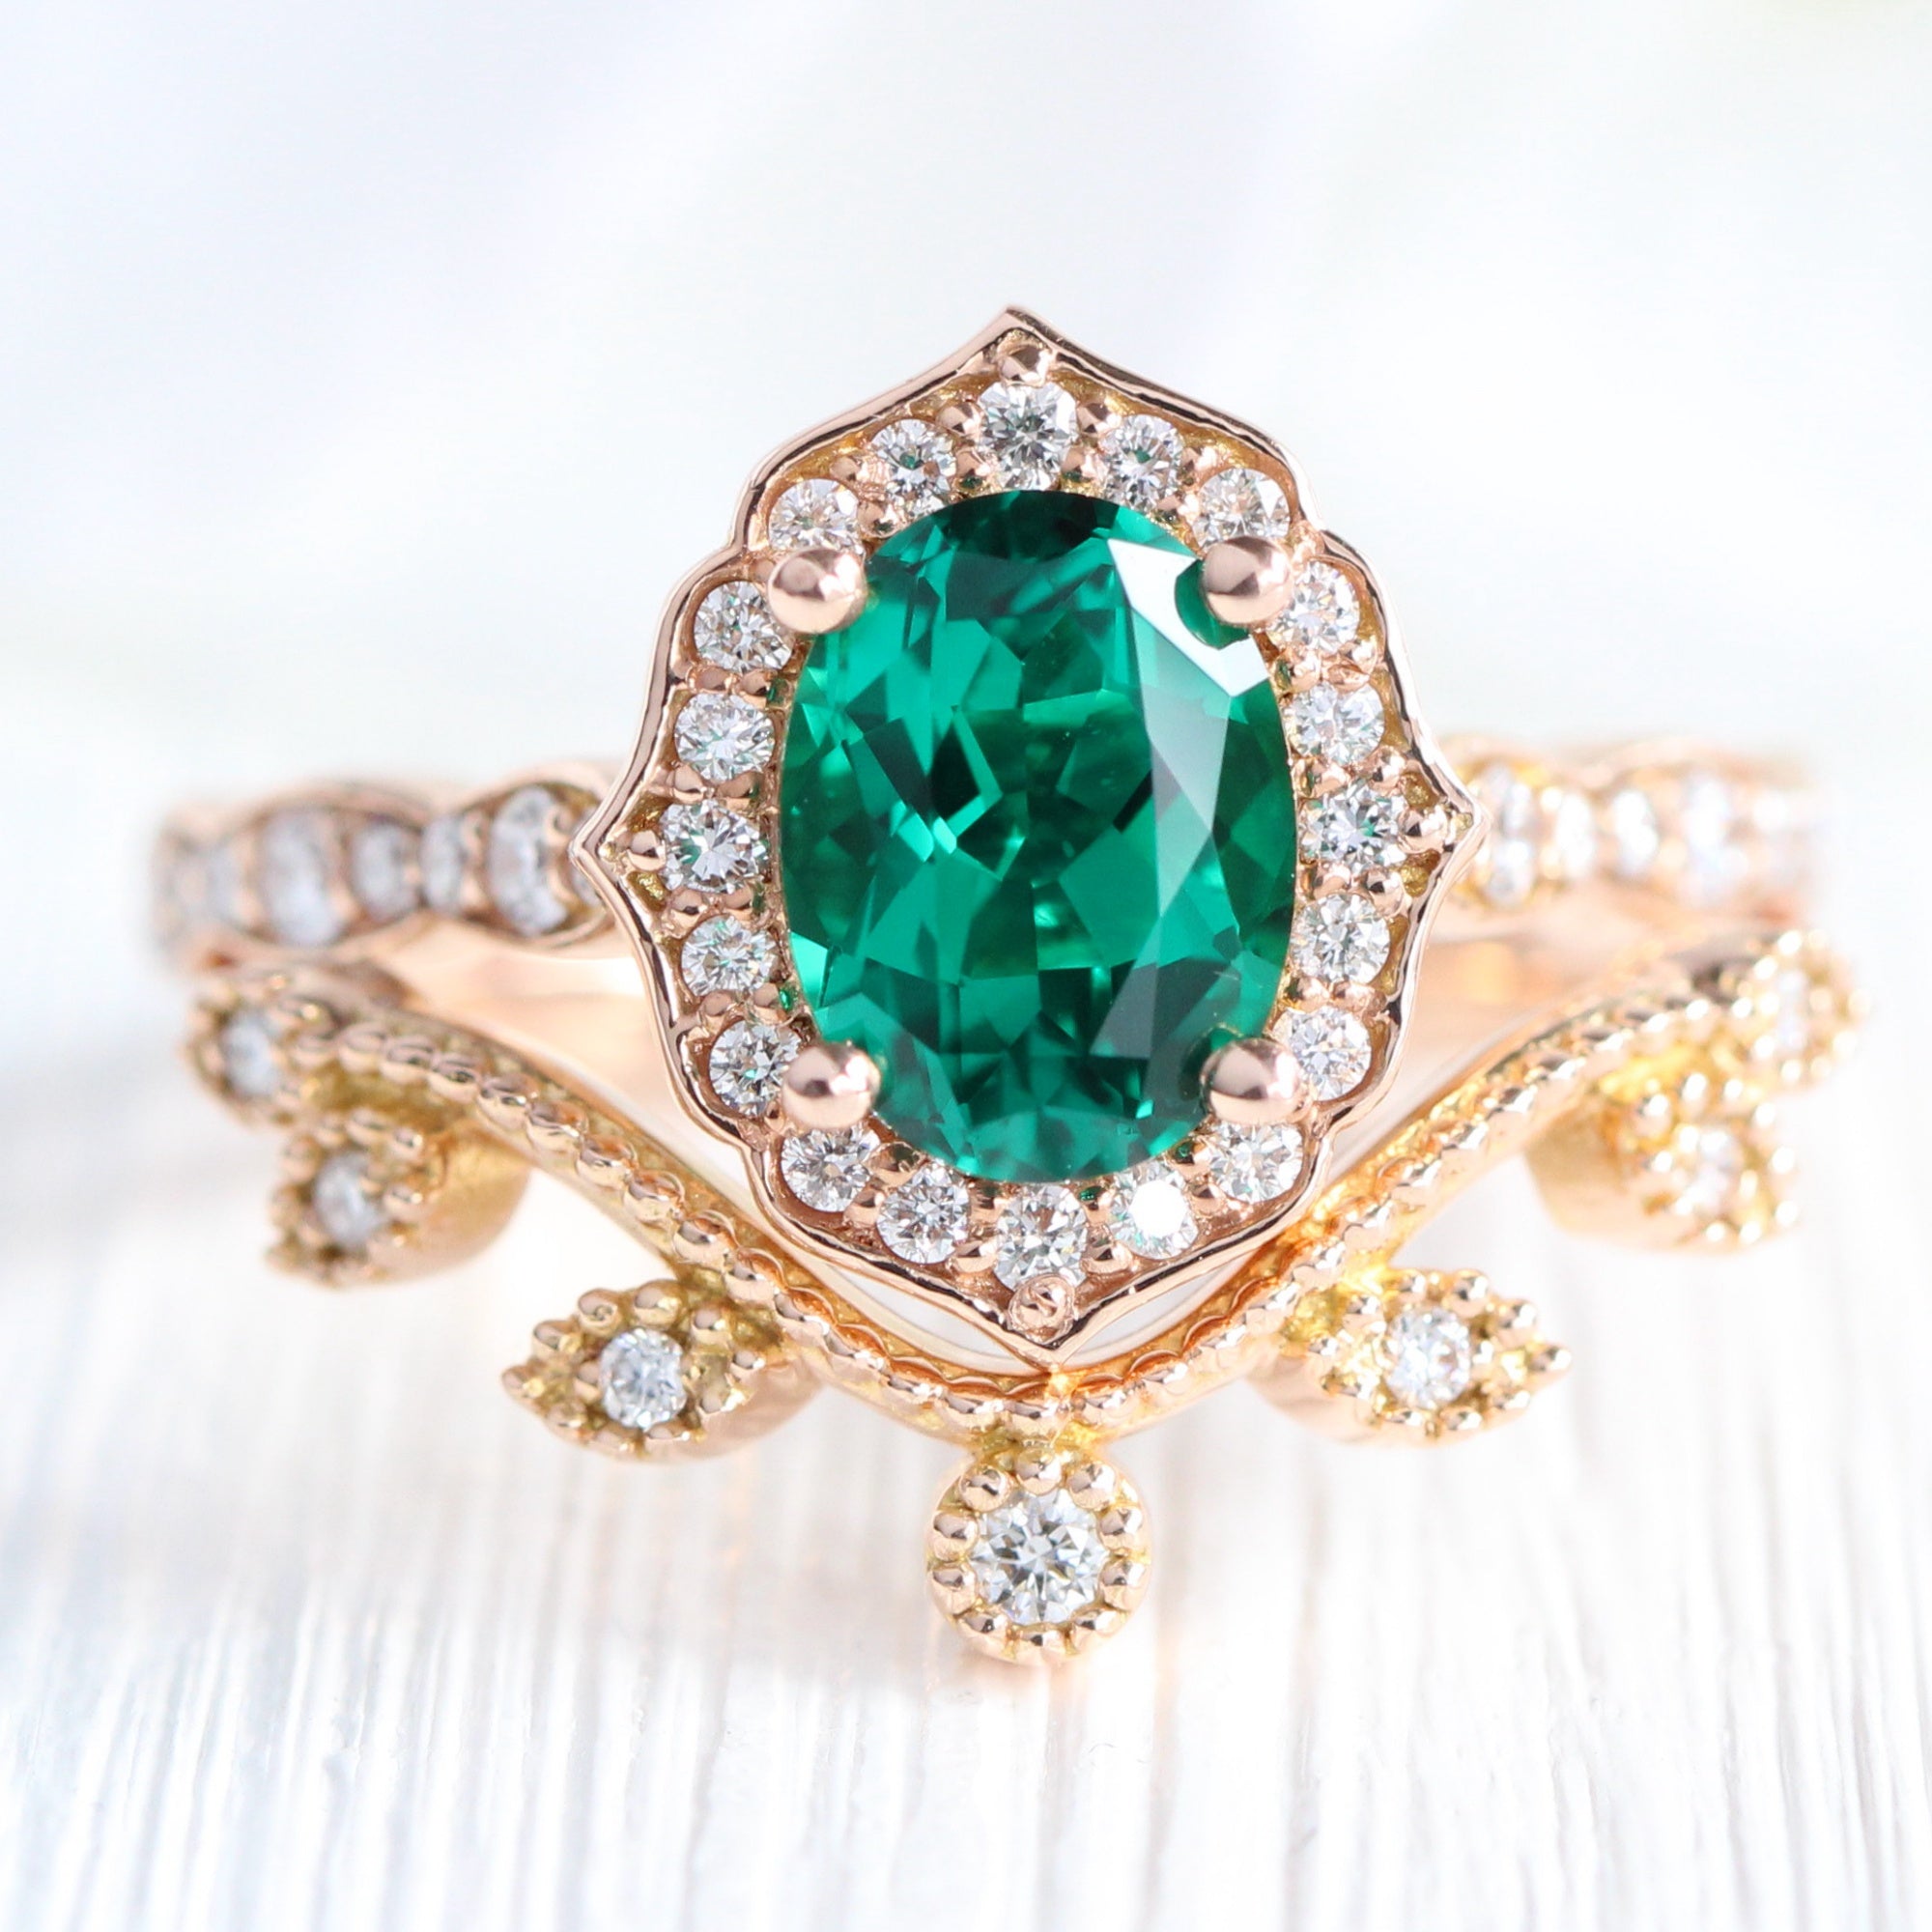 Vintage halo diamond emerald ring stack rose gold curved leaf band la more design jewelry